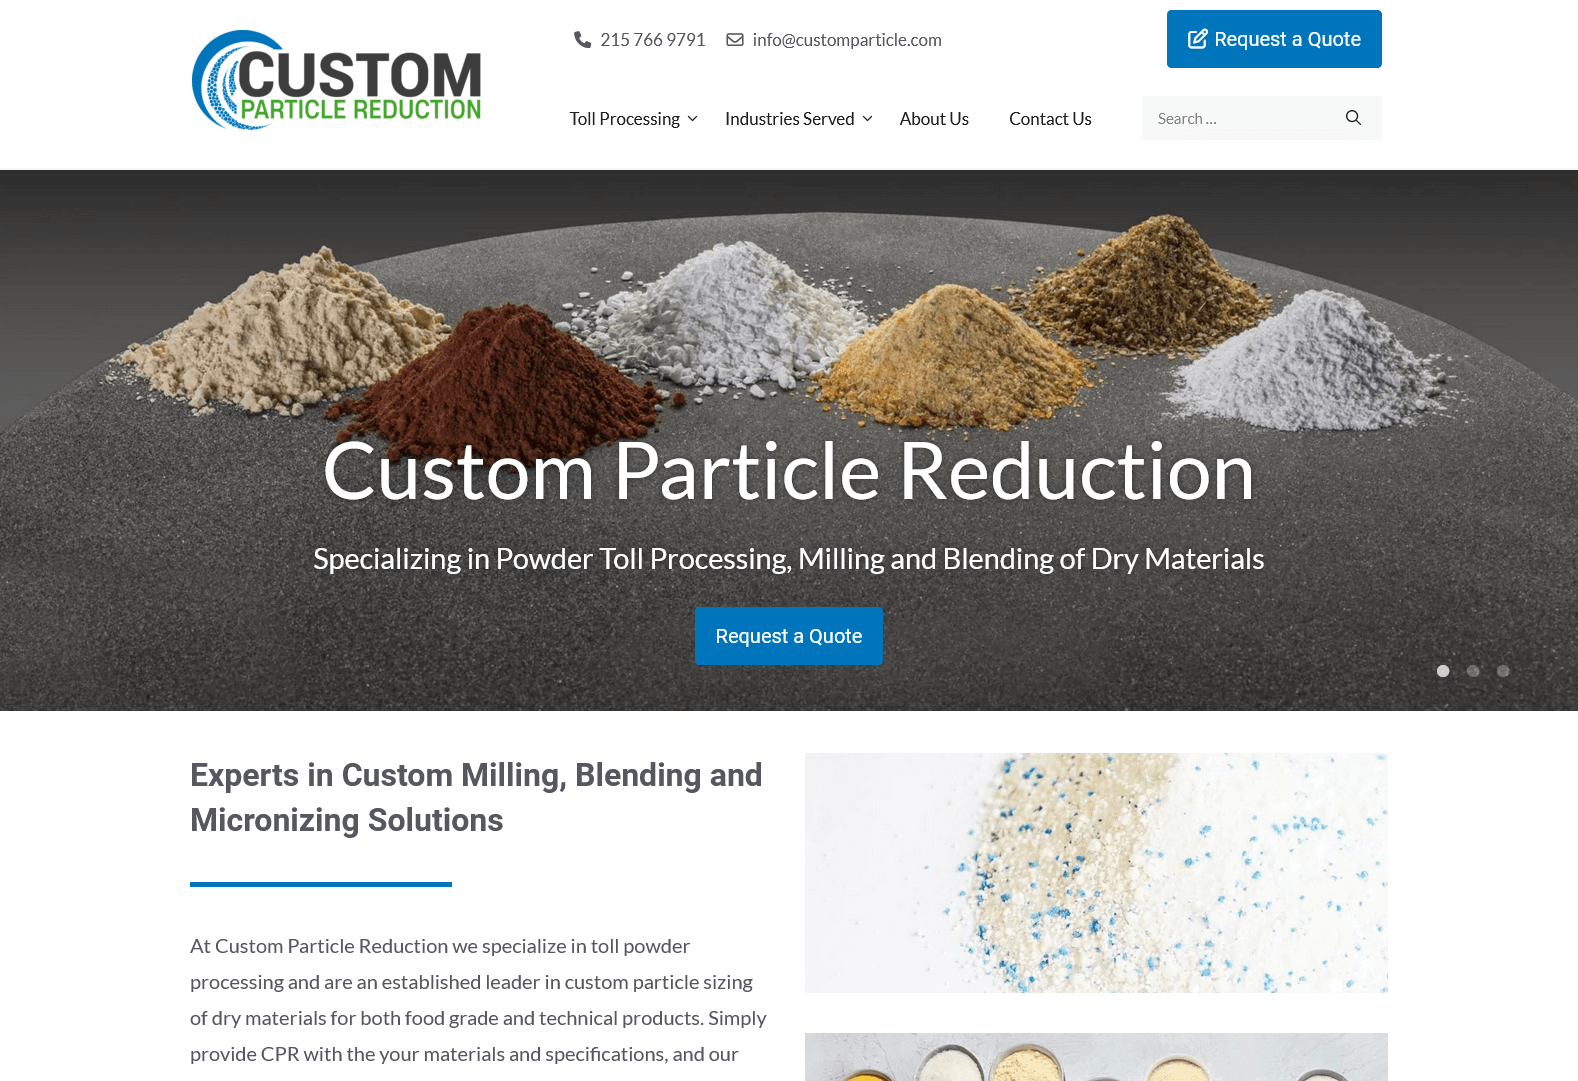 custom particle reduction homepage